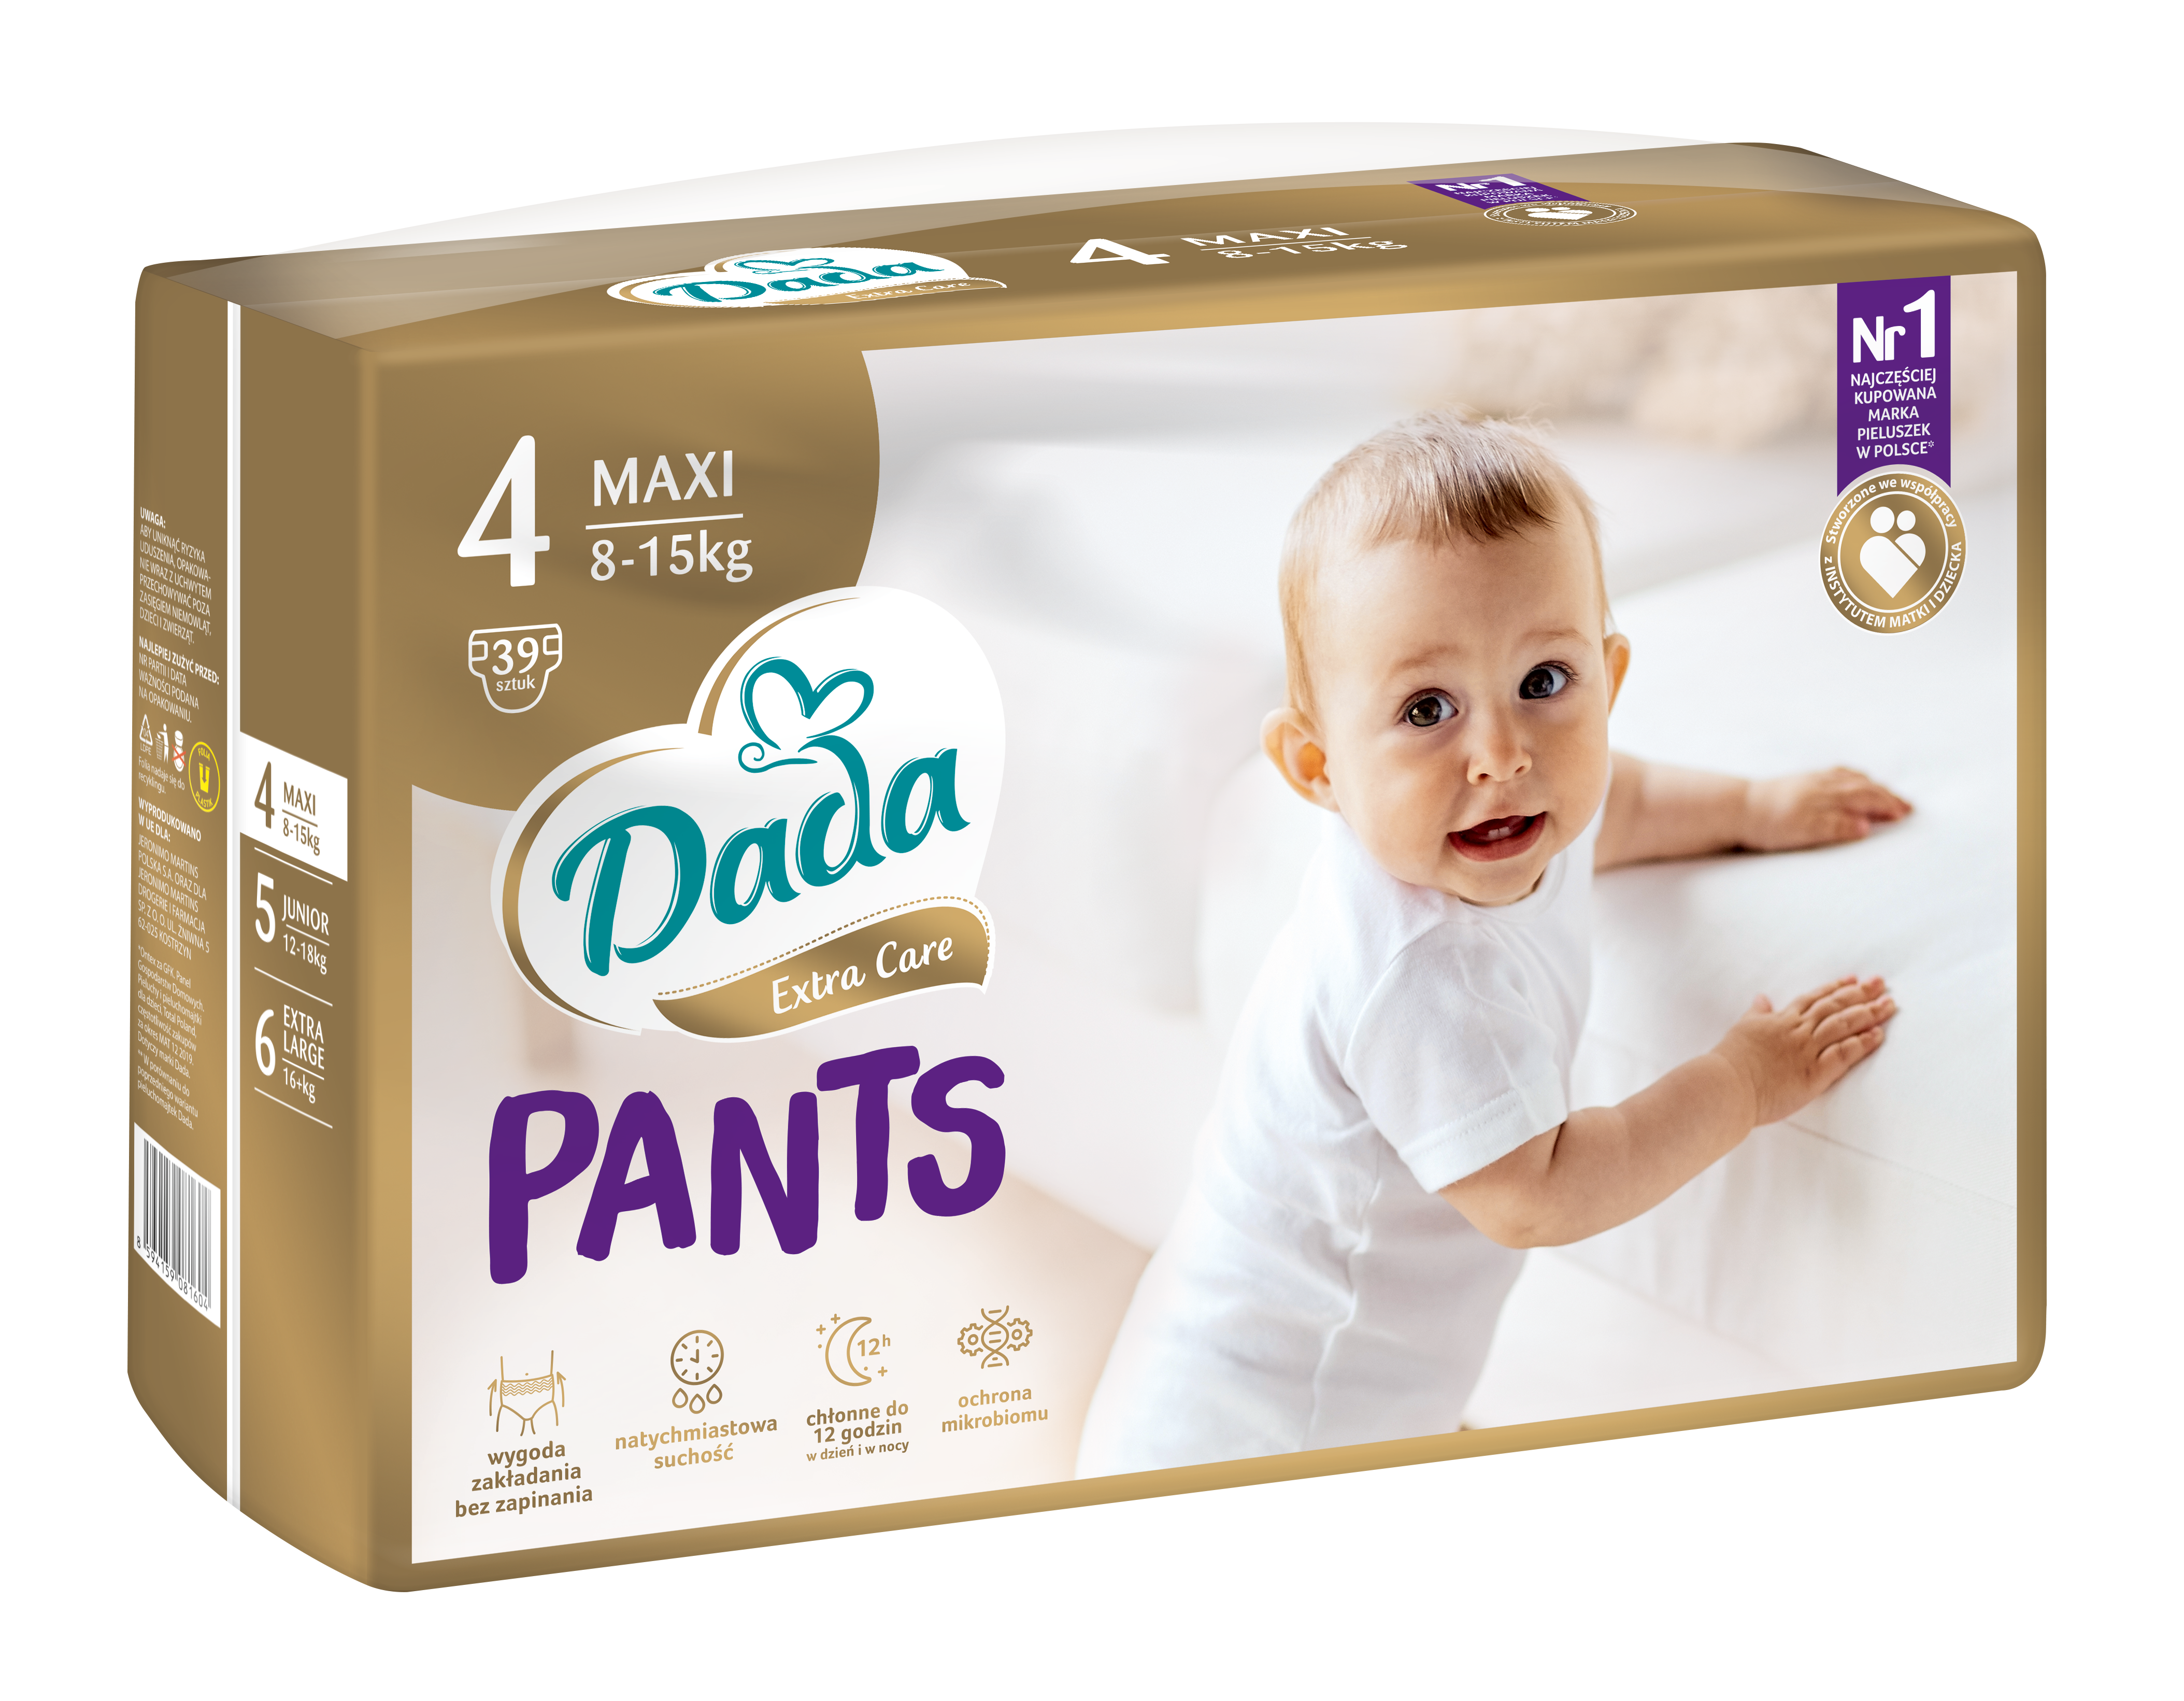 pampers dada 4 exstra care